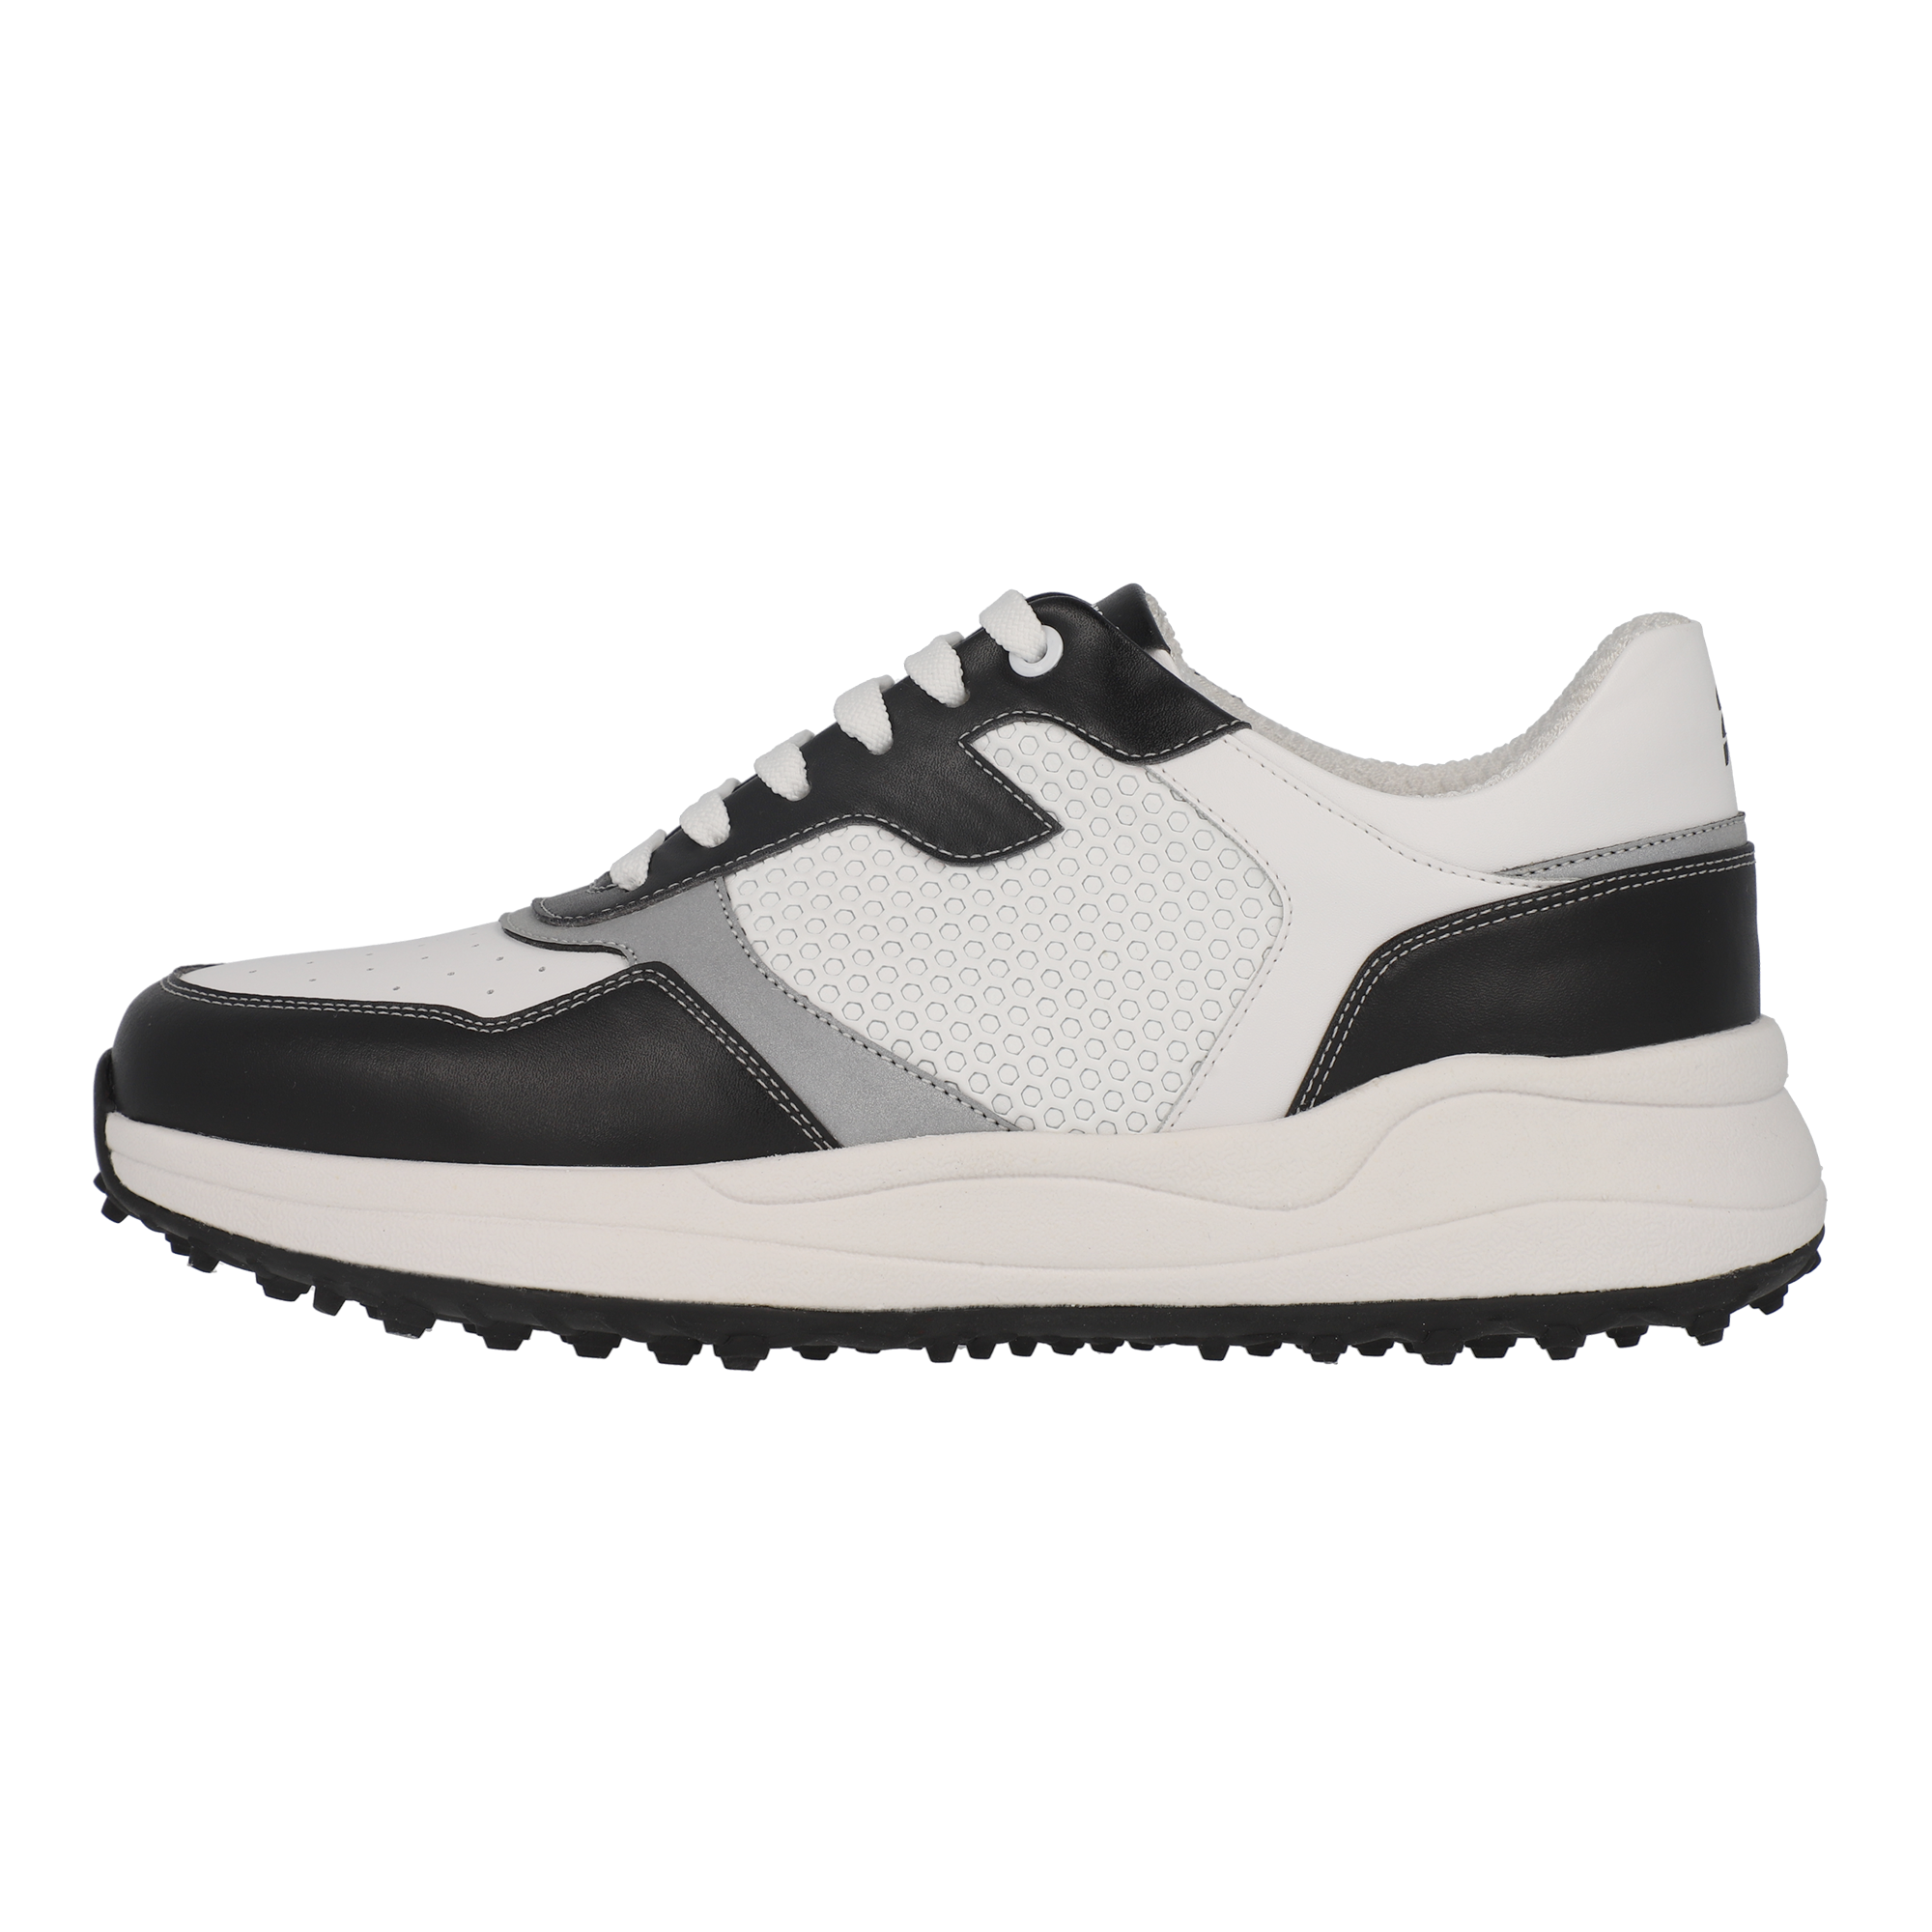 FITTEREST Spider Wave Golf Shoes for Women - FTR23 W SS BW204